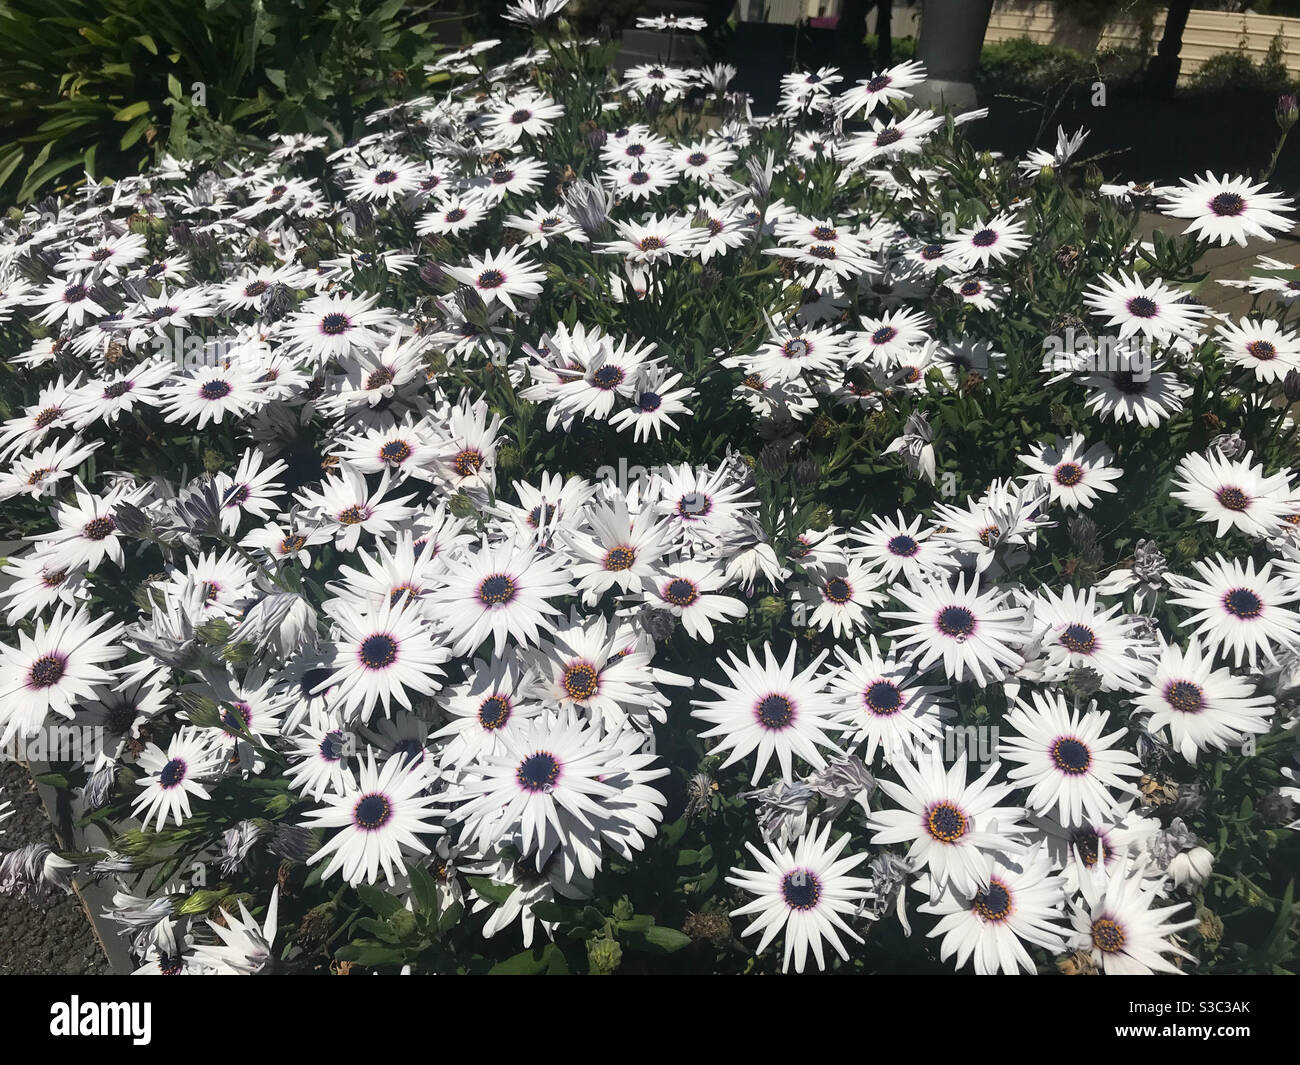 Garden bed of white daisies with purple centre in a sunny spring garden Stock Photo